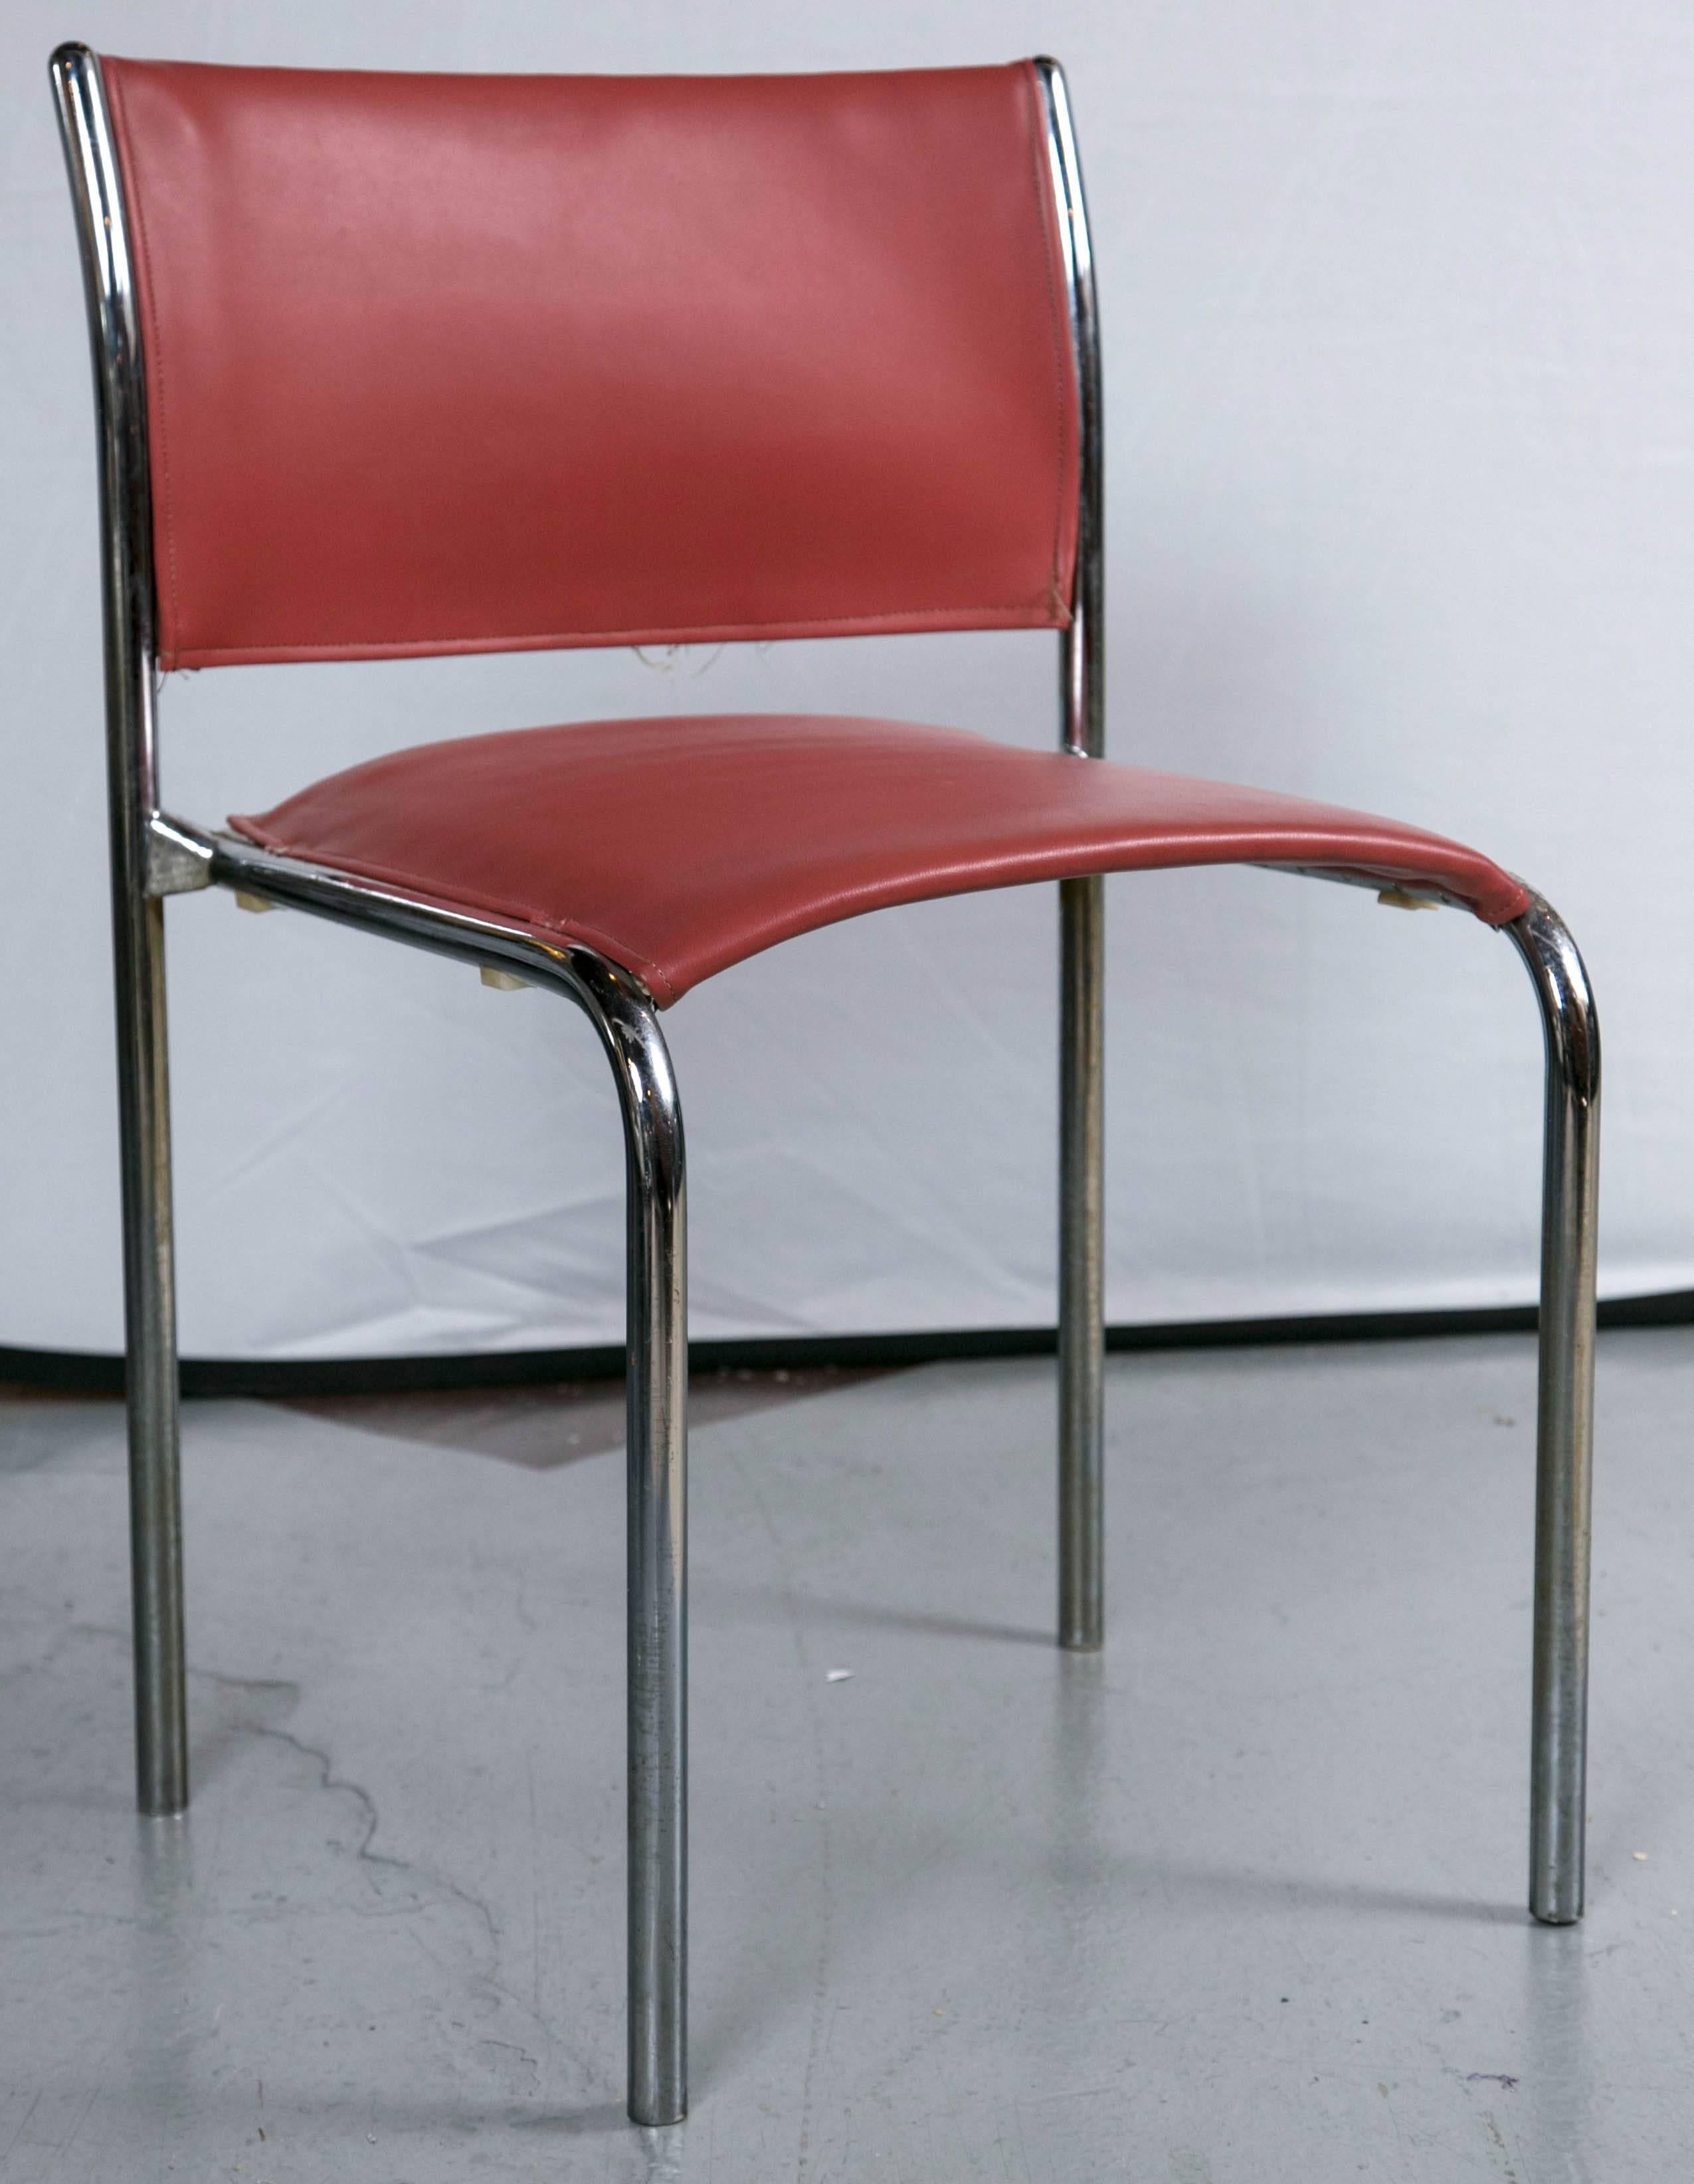 A total of ten Mies van der Rohe/Brno style chairs made by Thonet with seamless tubular chrome frame. Beautiful cantilevered design, extremely well made and very comfortable. Can purchase as many as is needed to suit your needs.